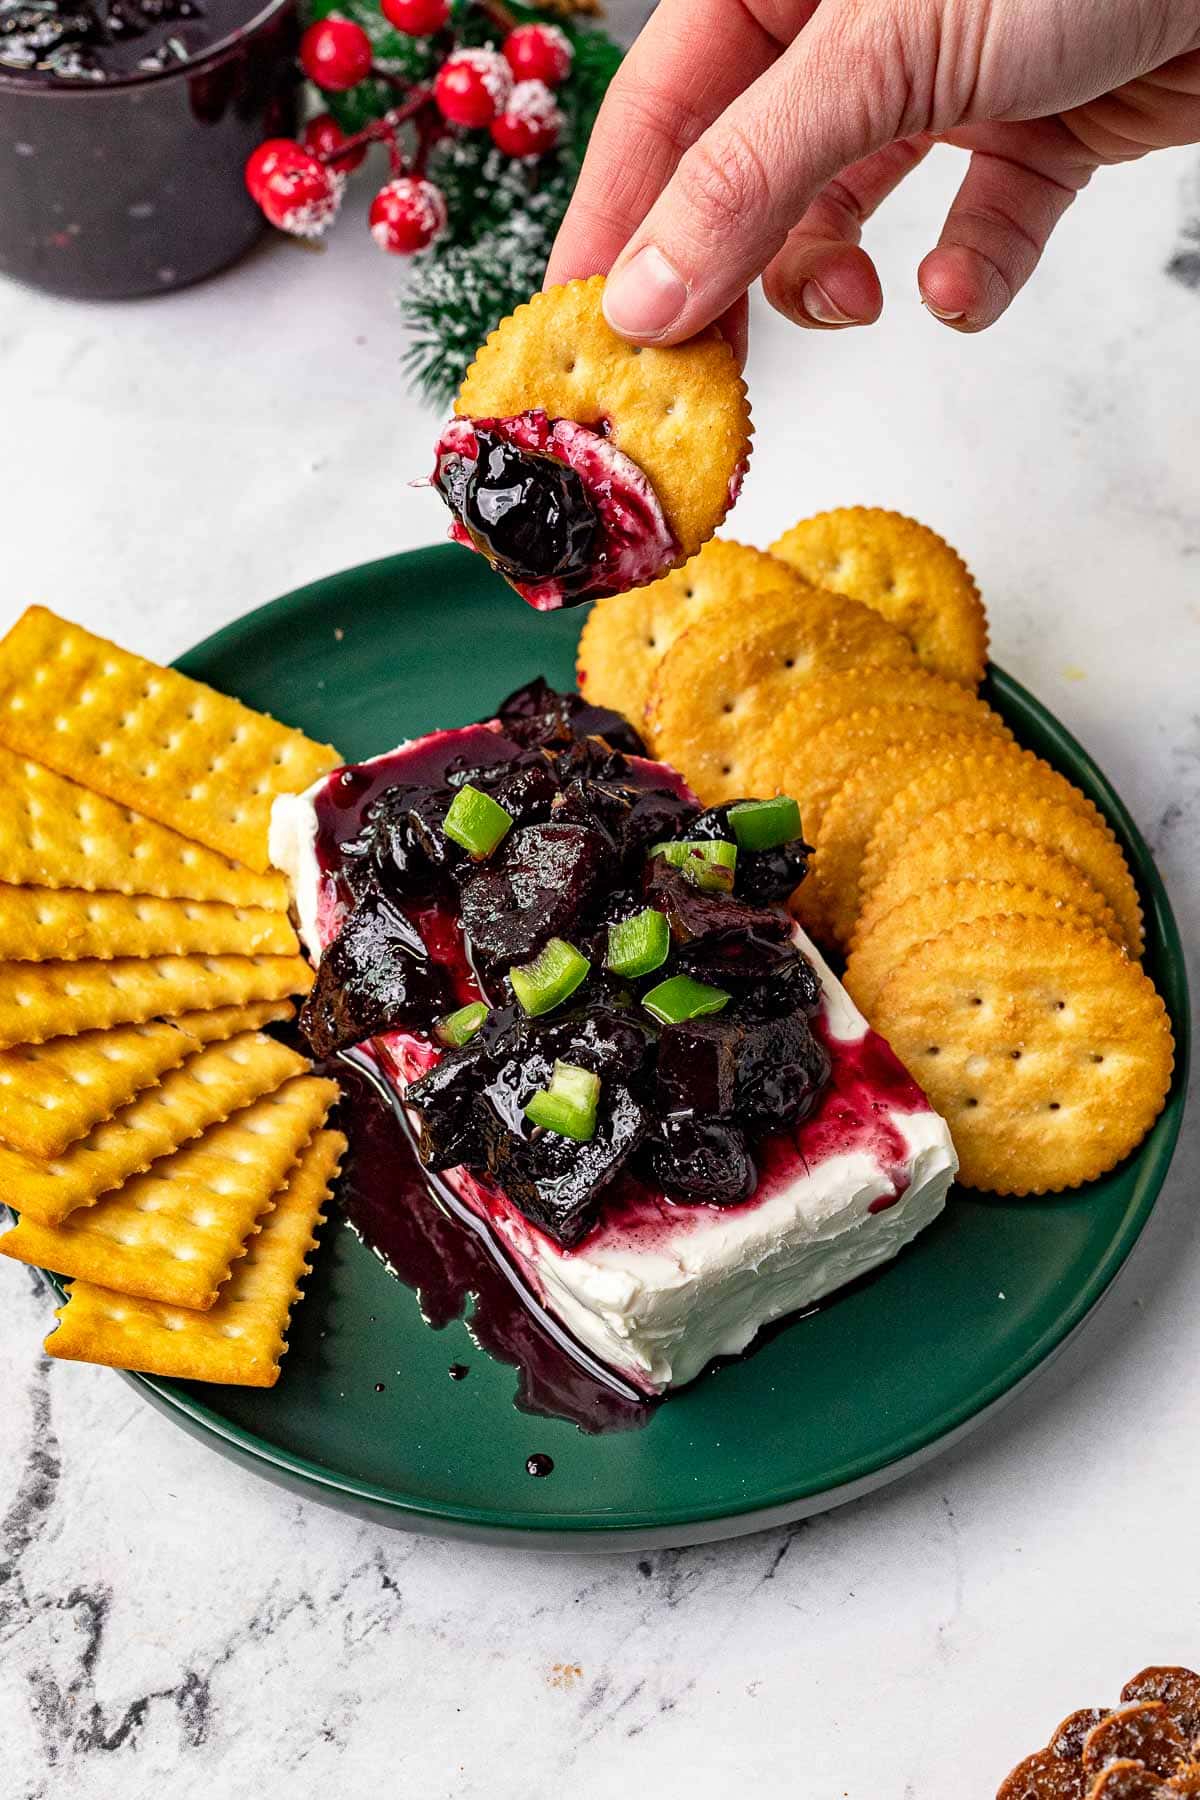 Cherry Jalapeno Jam prepared and served on cream cheese with crackers, dipping cracker in jam and cream cheese